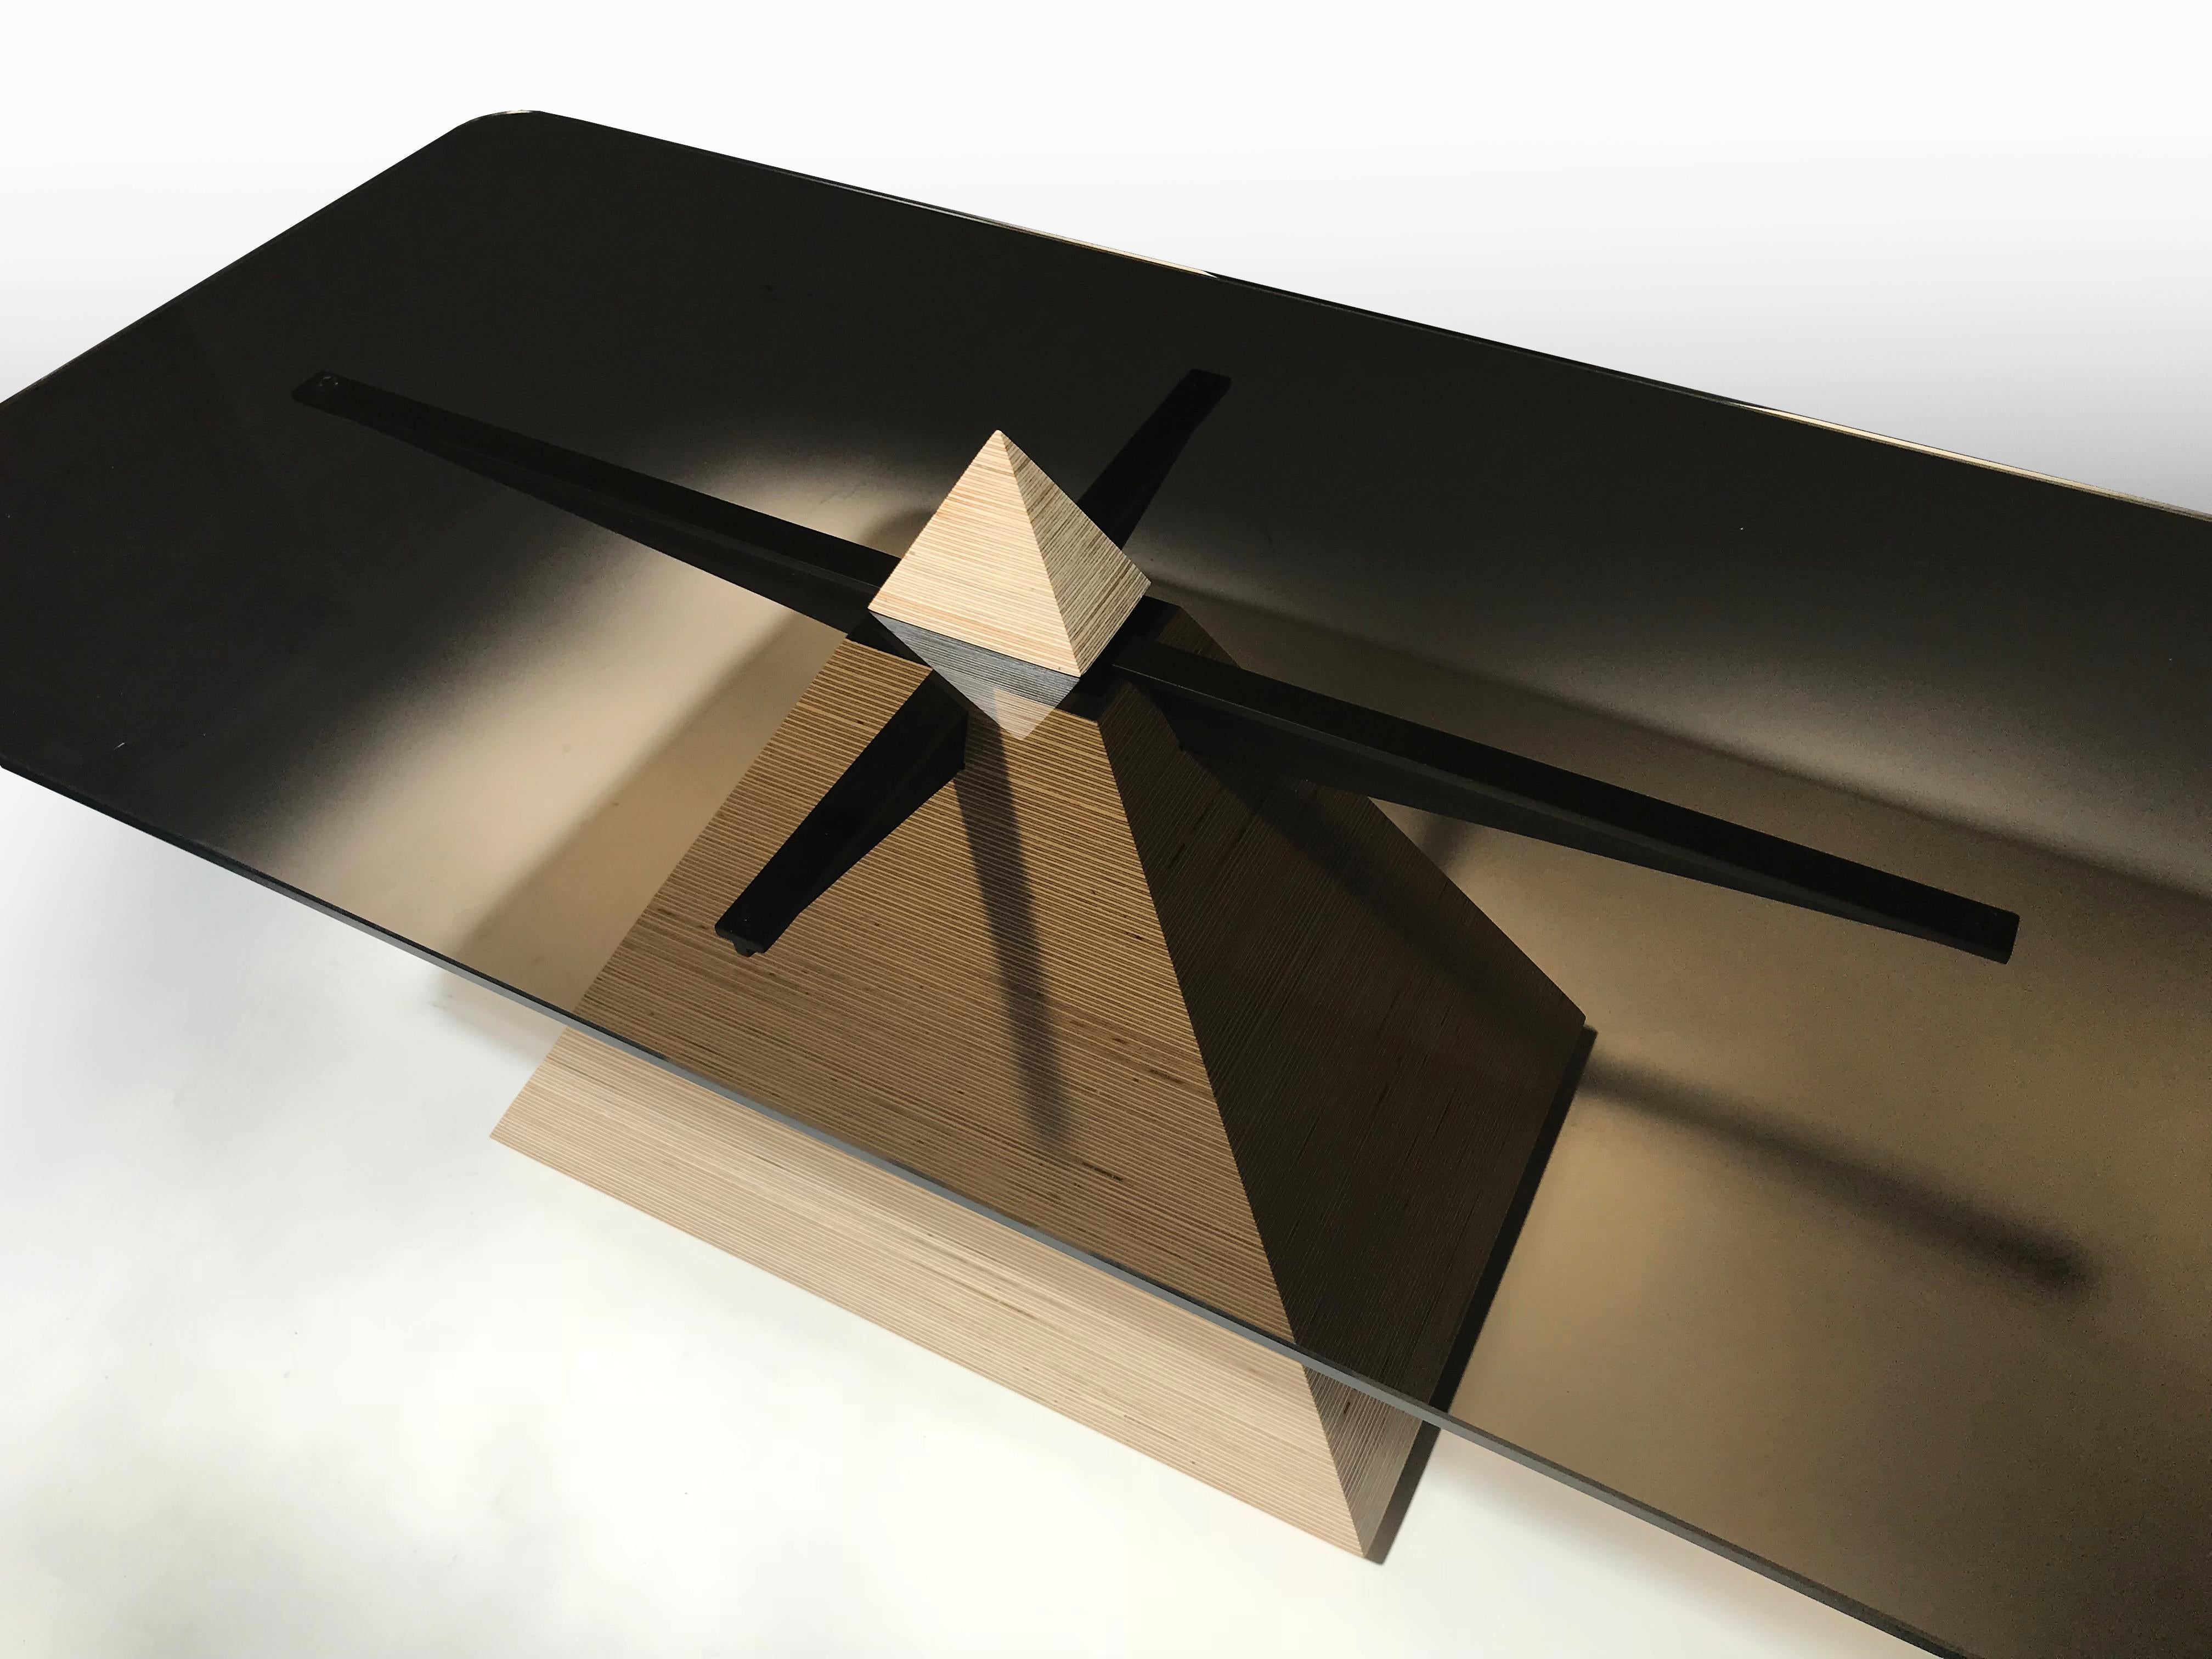 EÆ Pyramid Halo table in laminated Finland Birch plywood and black glass. An exercise in intersecting geometry and materials. The pyramid base appears to pierce through the smoked glass top while a blackened steel armature supports the table top